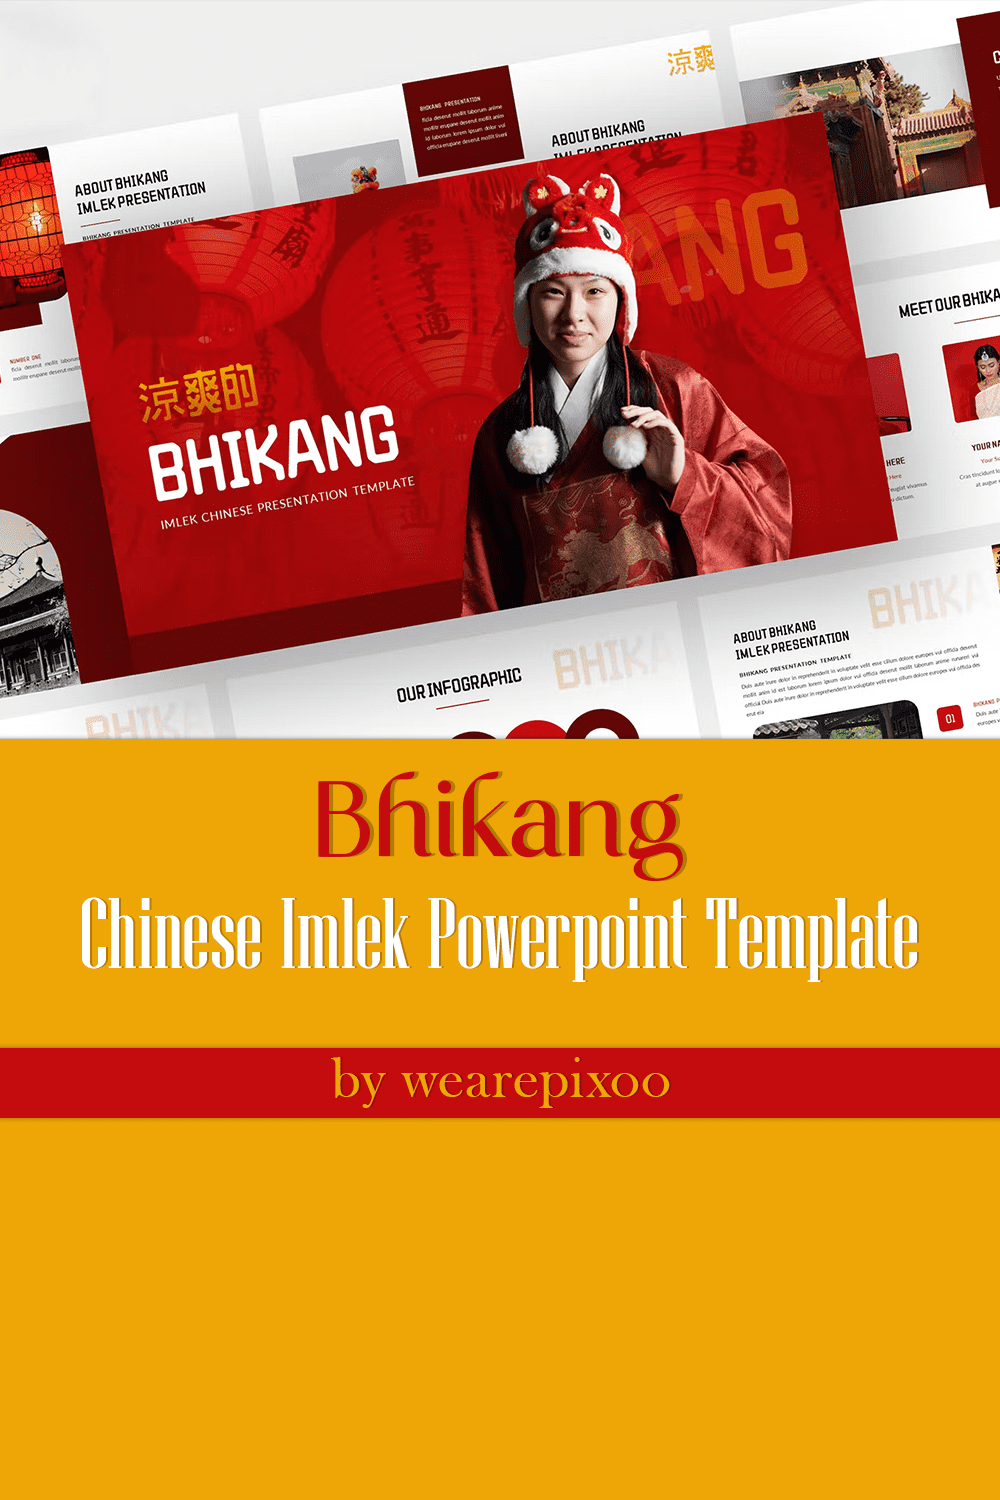 Inscription "Bhikang - Chinese Imlek Powerpoint Template" on the yelllow background.